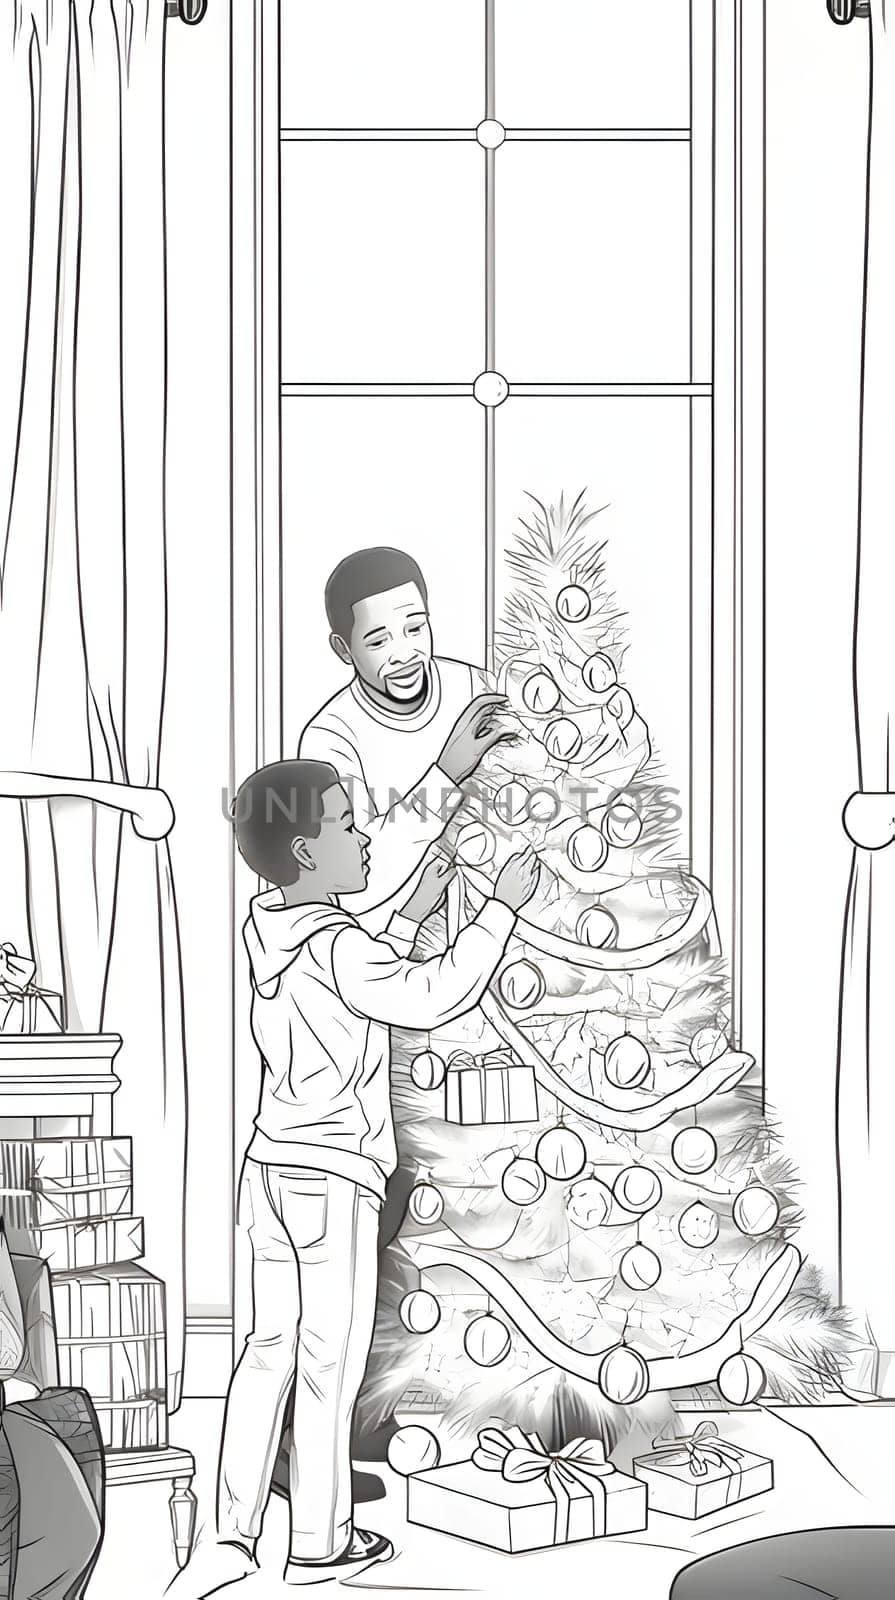 Father and son decorate Christmas tree, black and white coloring sheet. Xmas tree as a symbol of Christmas of the birth of the Savior. by ThemesS